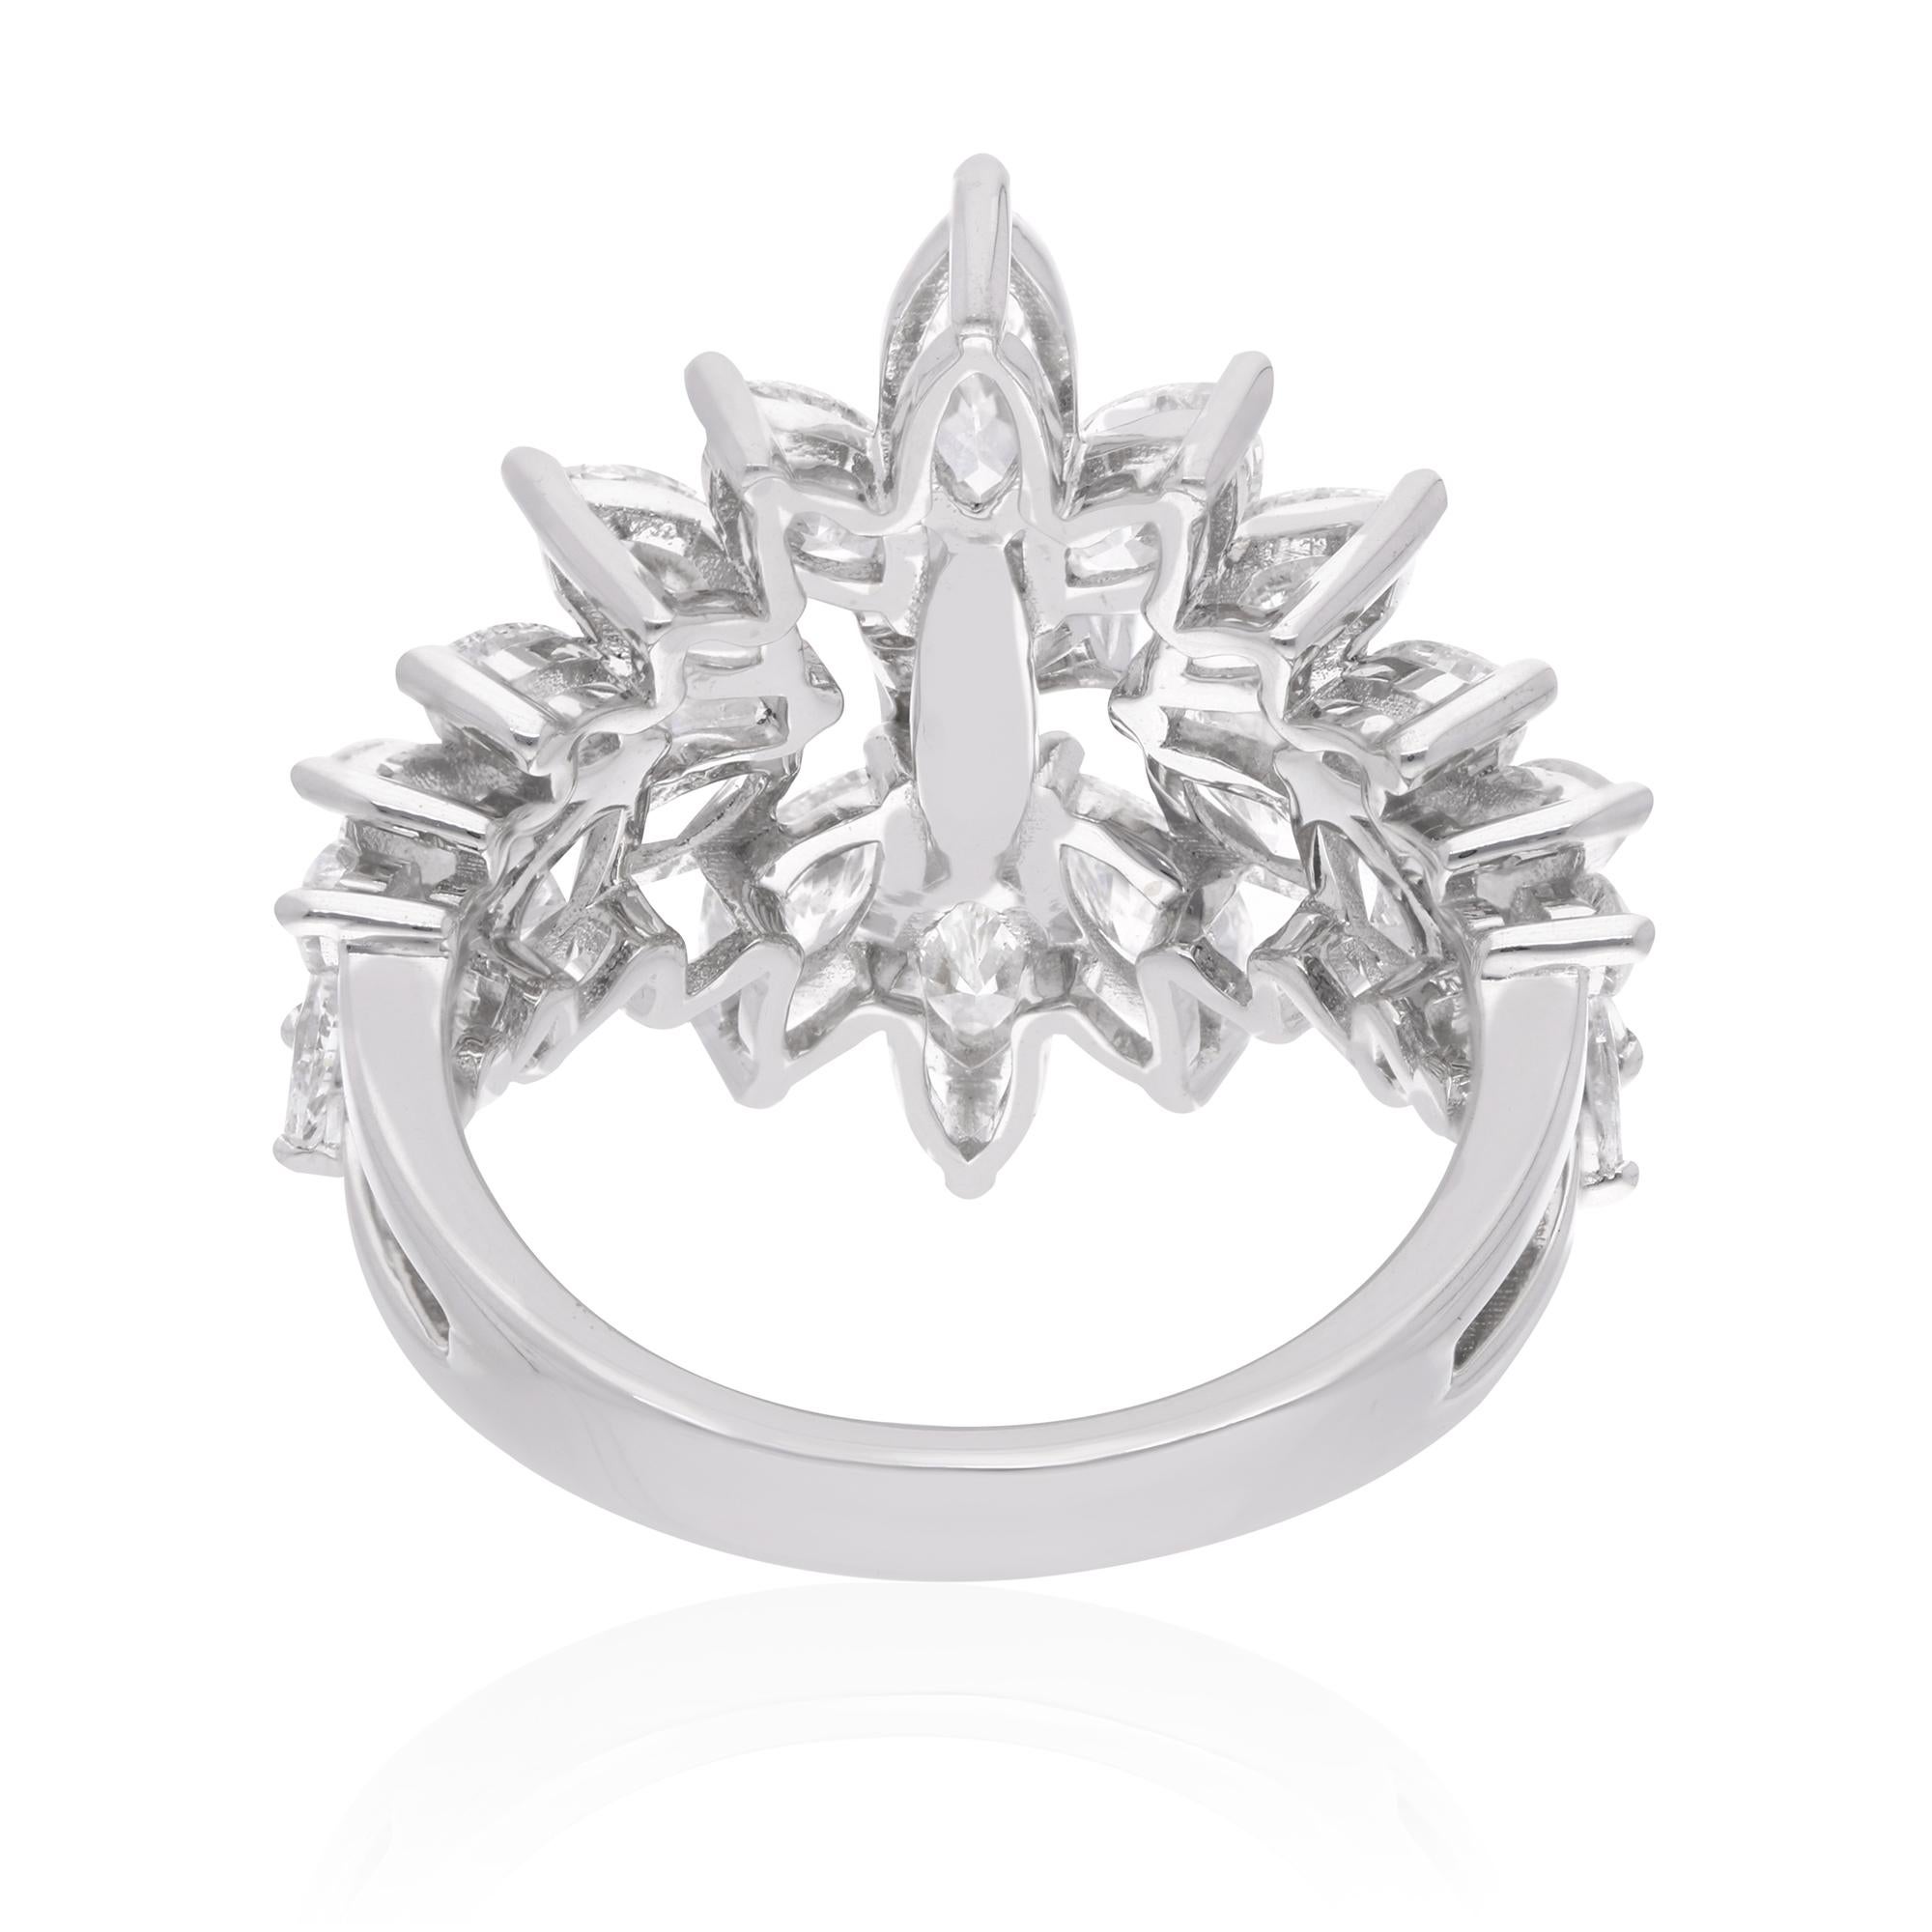 At the heart of this stunning ring lies a magnificent marquise-cut diamond, radiating with brilliance and fire. Its elongated shape exudes a sense of regal splendor, while its exceptional clarity and color capture the light in a mesmerizing dance of